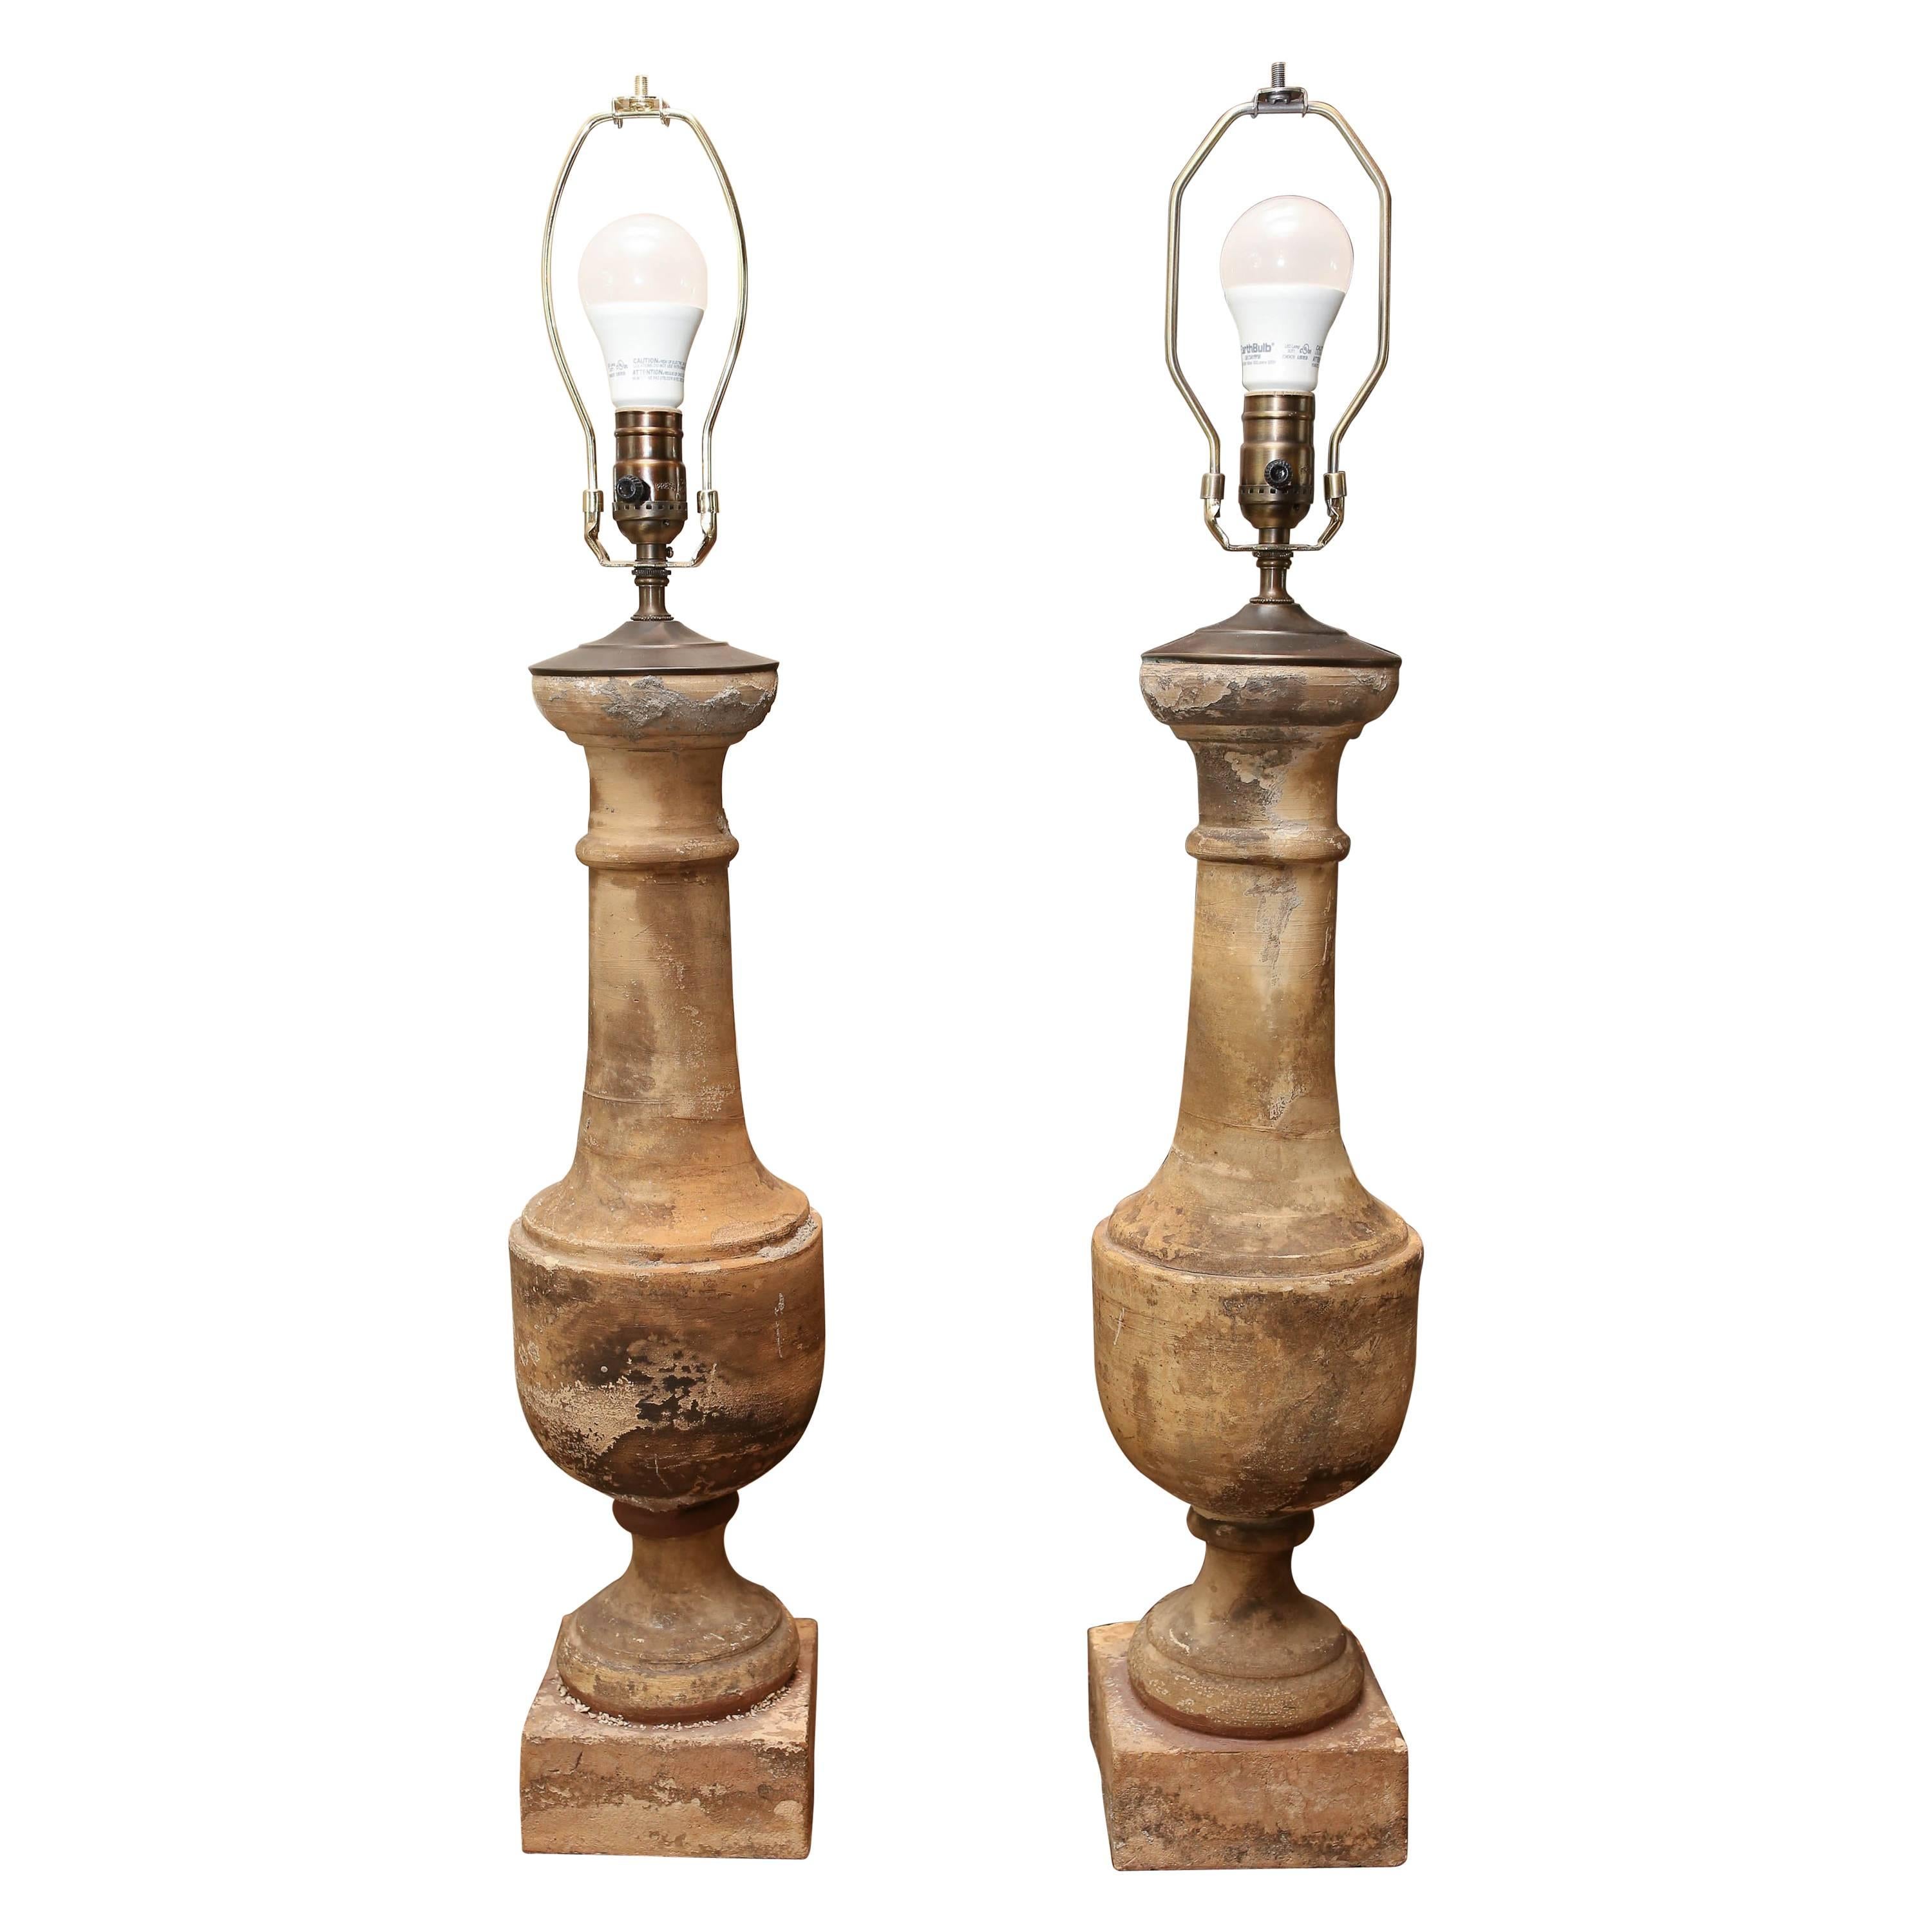 19th Century Columns Made into Lamps